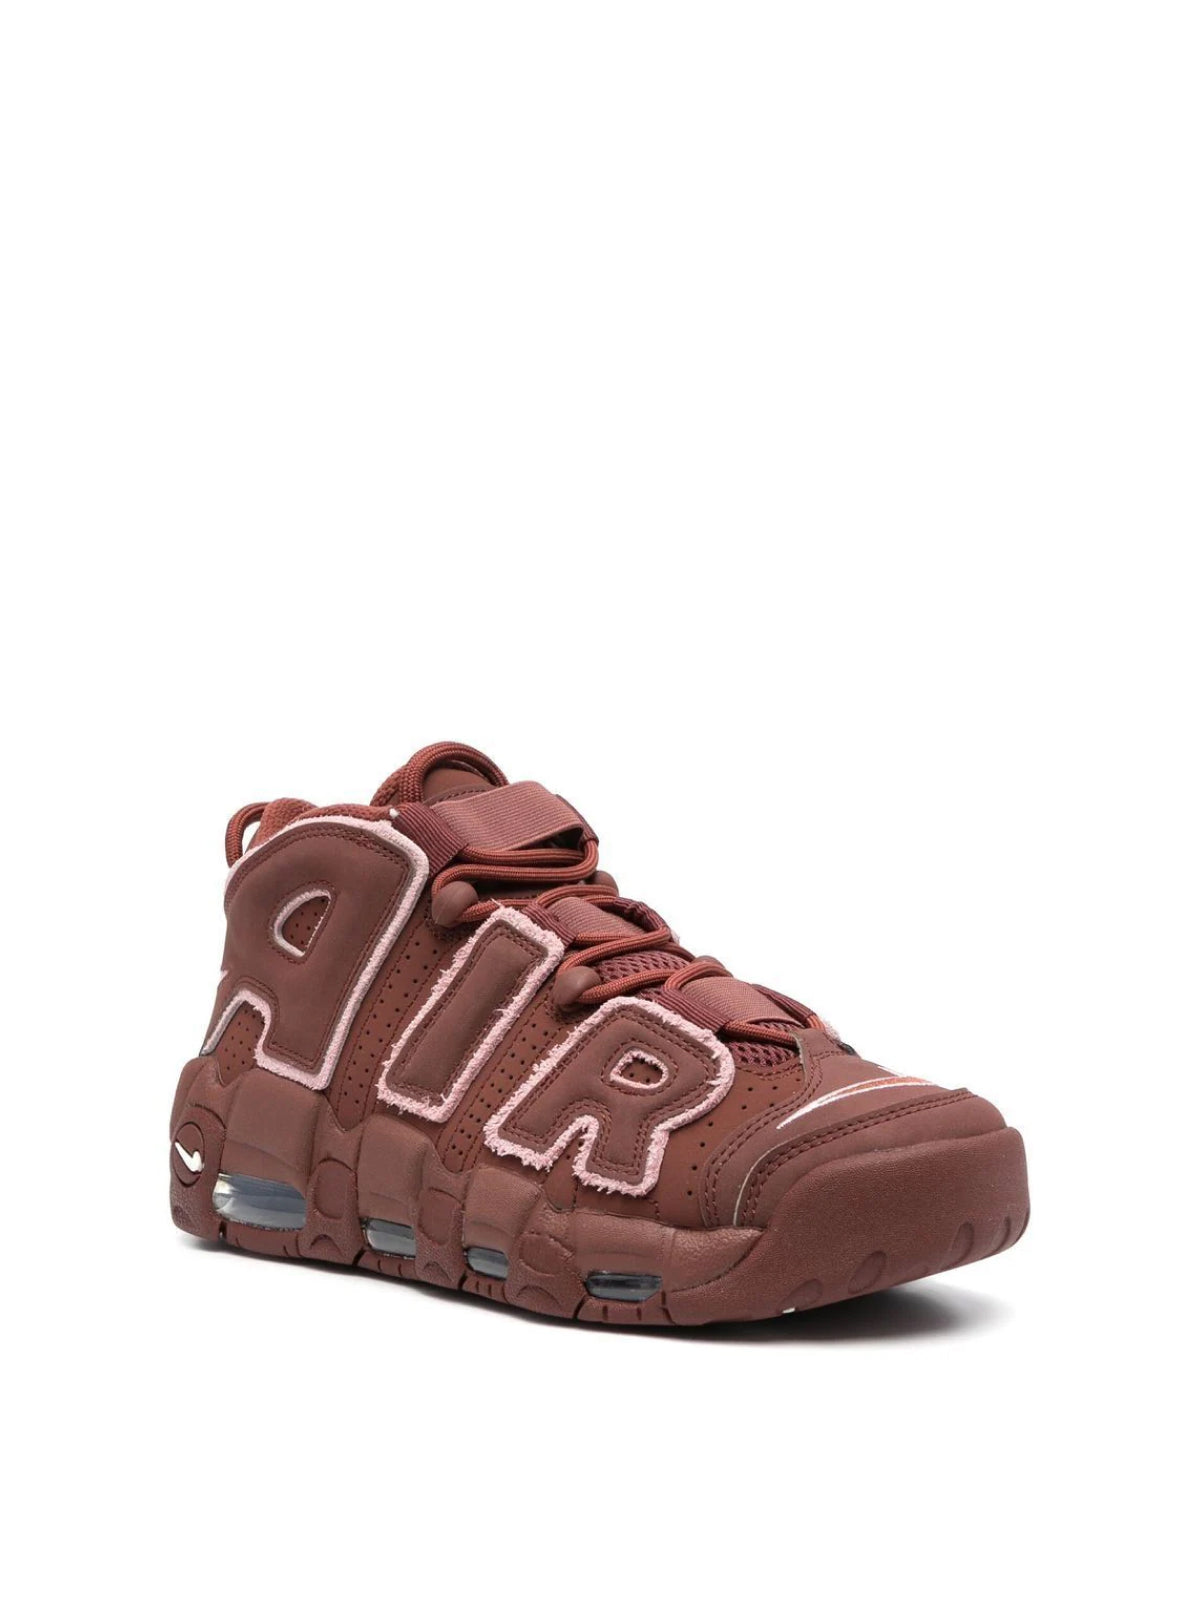 Nike-OUTLET-SALE-Air More Uptempo '96 Sneakers-ARCHIVIST